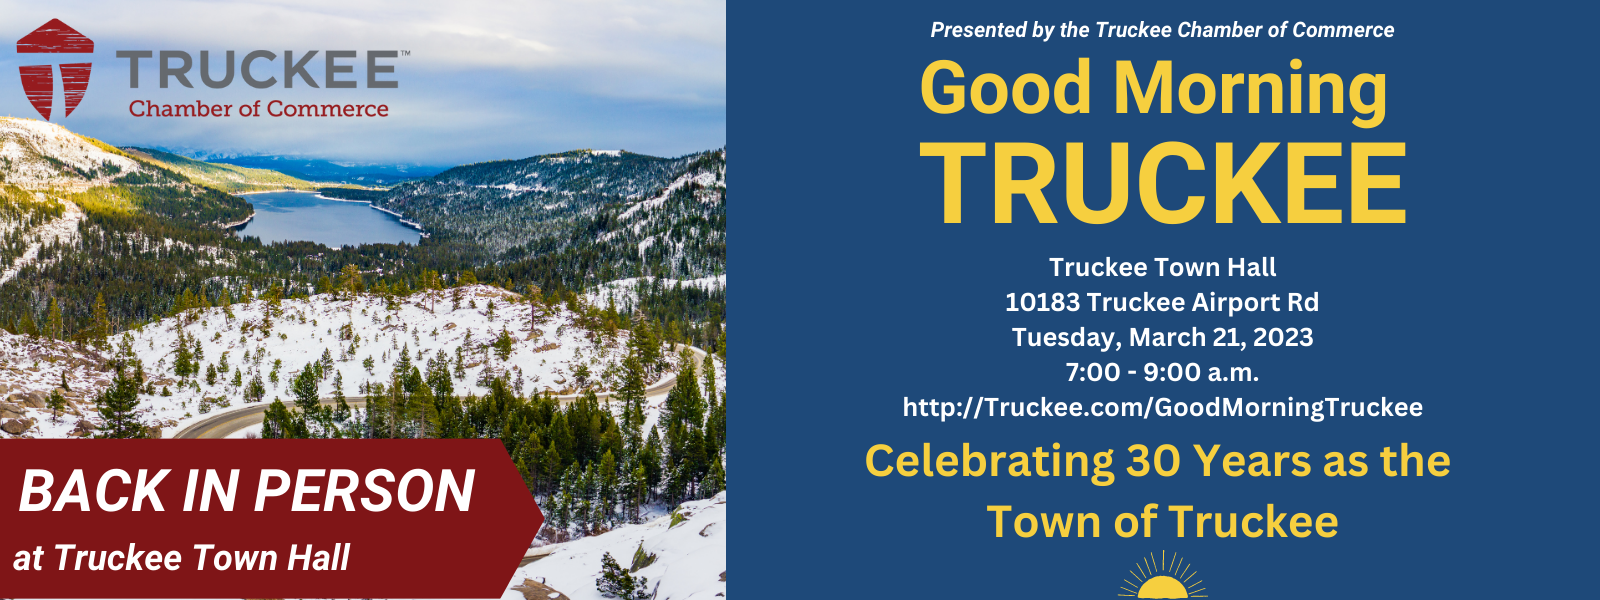 March 21, 2023 Good Morning  Truckee: Celebrating 30 Years as the Town of Truckee